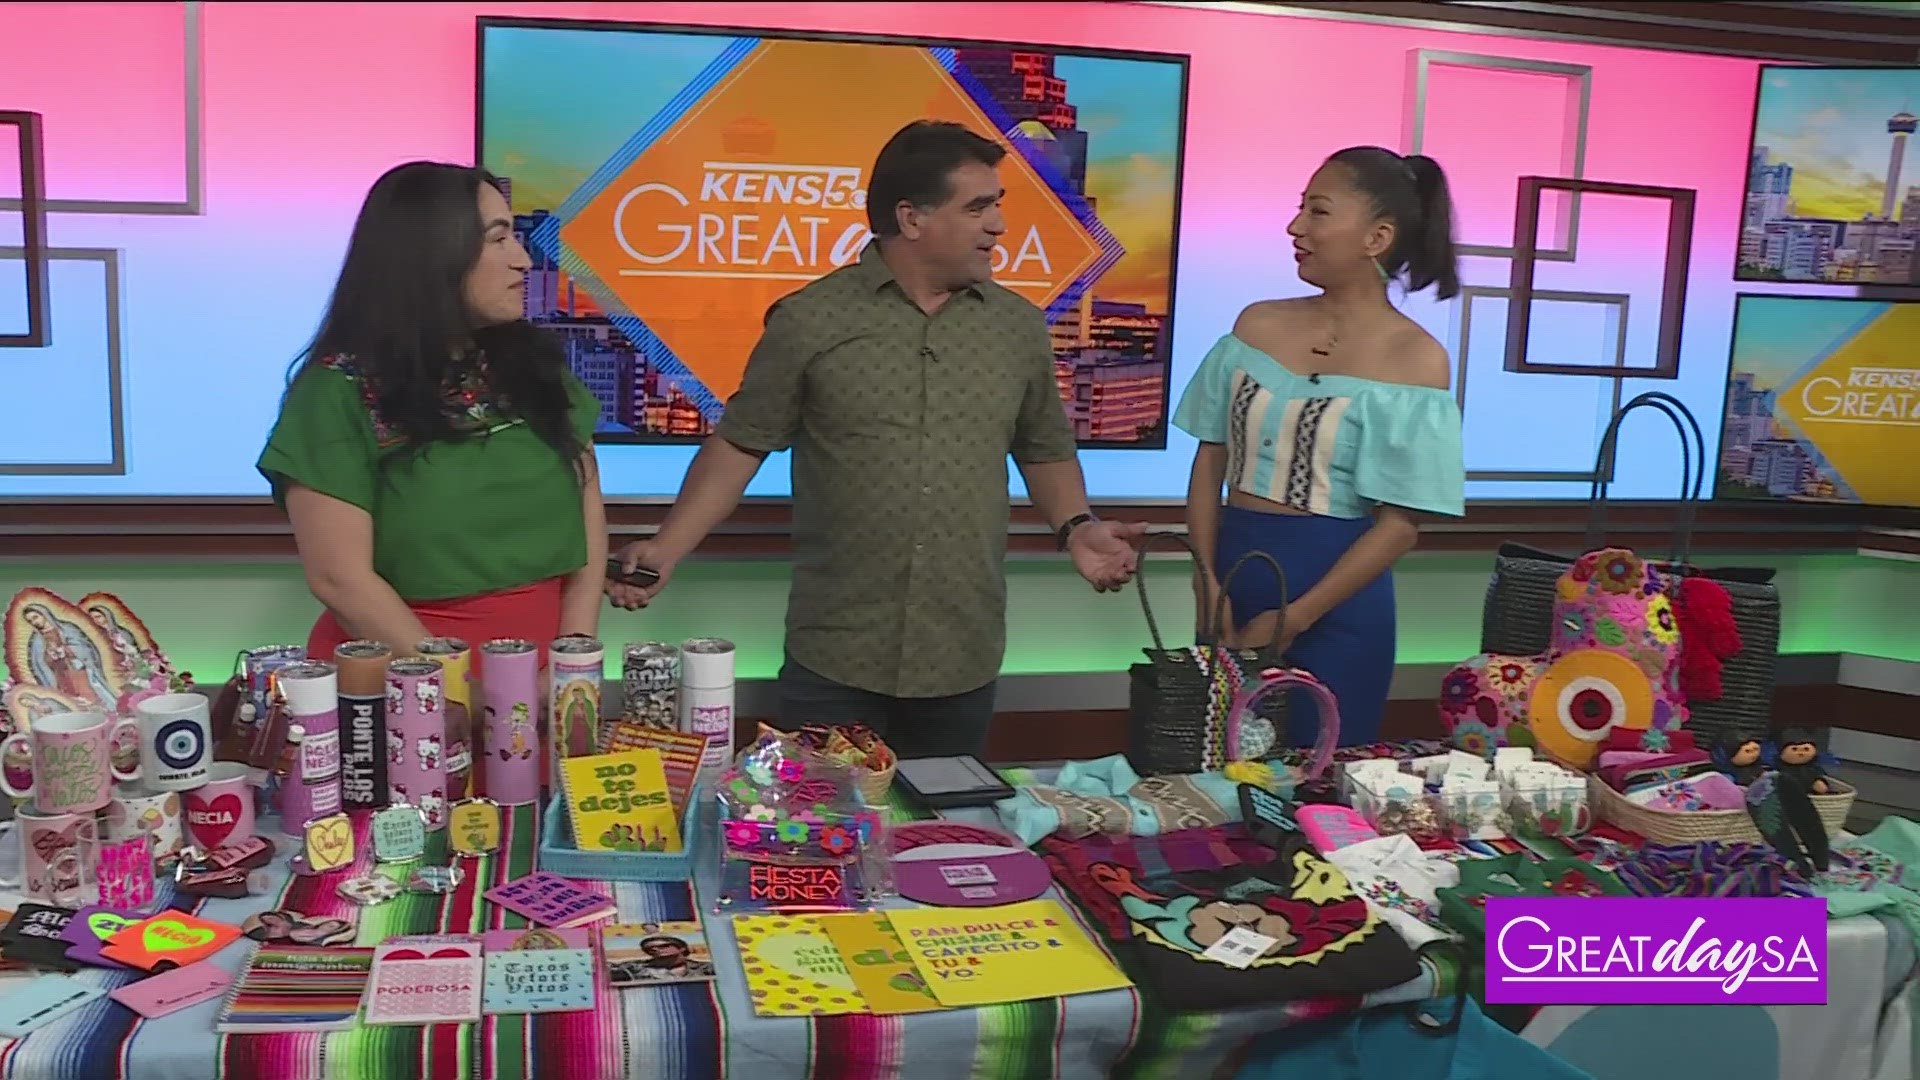 Chasing Camilla & Very That stop by to share what they've got for all your Fiesta needs.